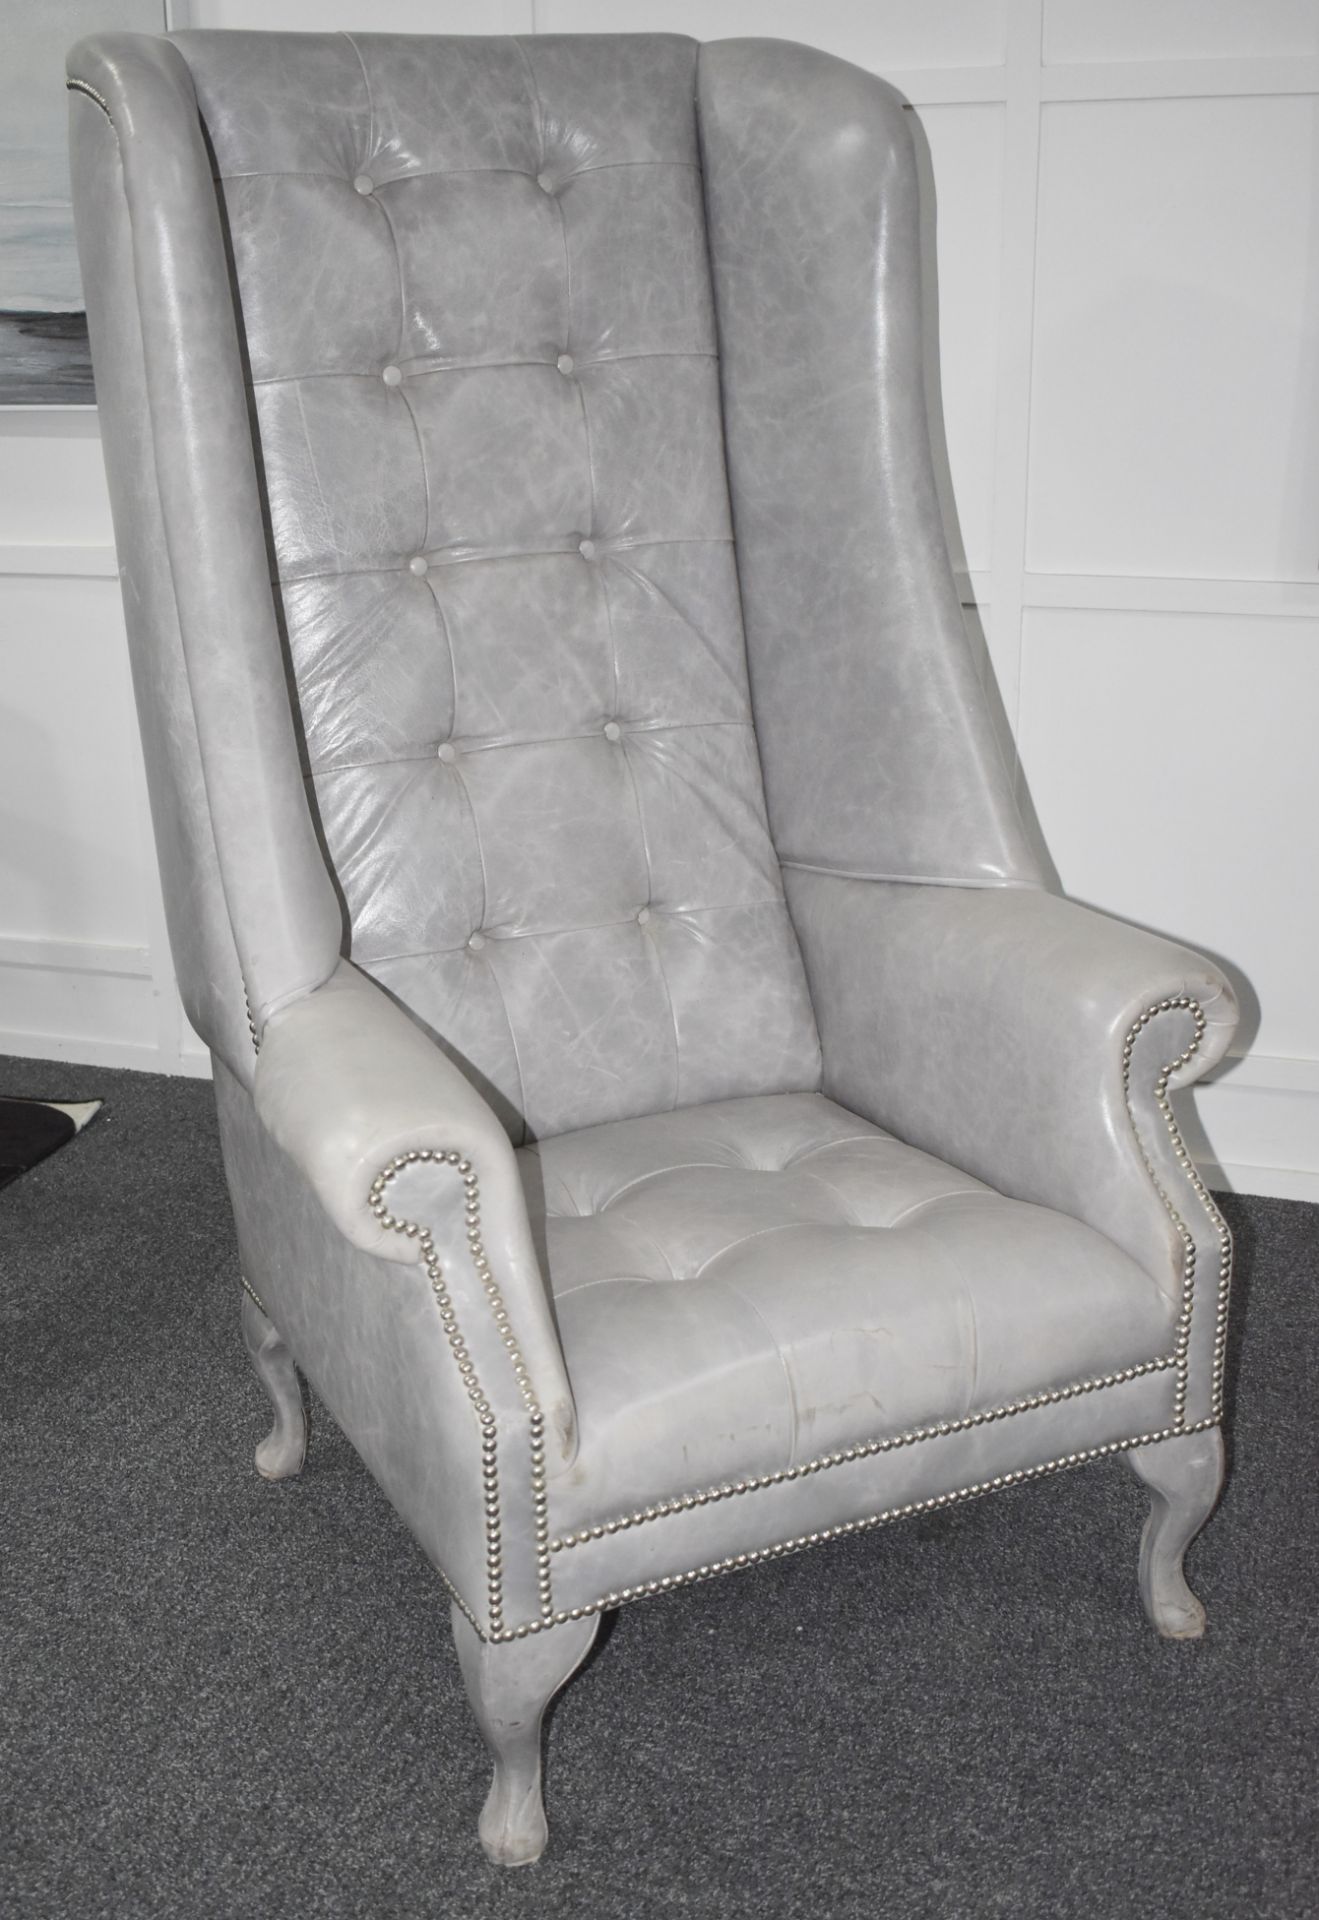 1 x Buttoned Leather Upholsteterd High-back Armchair in Light Grey - Luxury Furniture Showroom